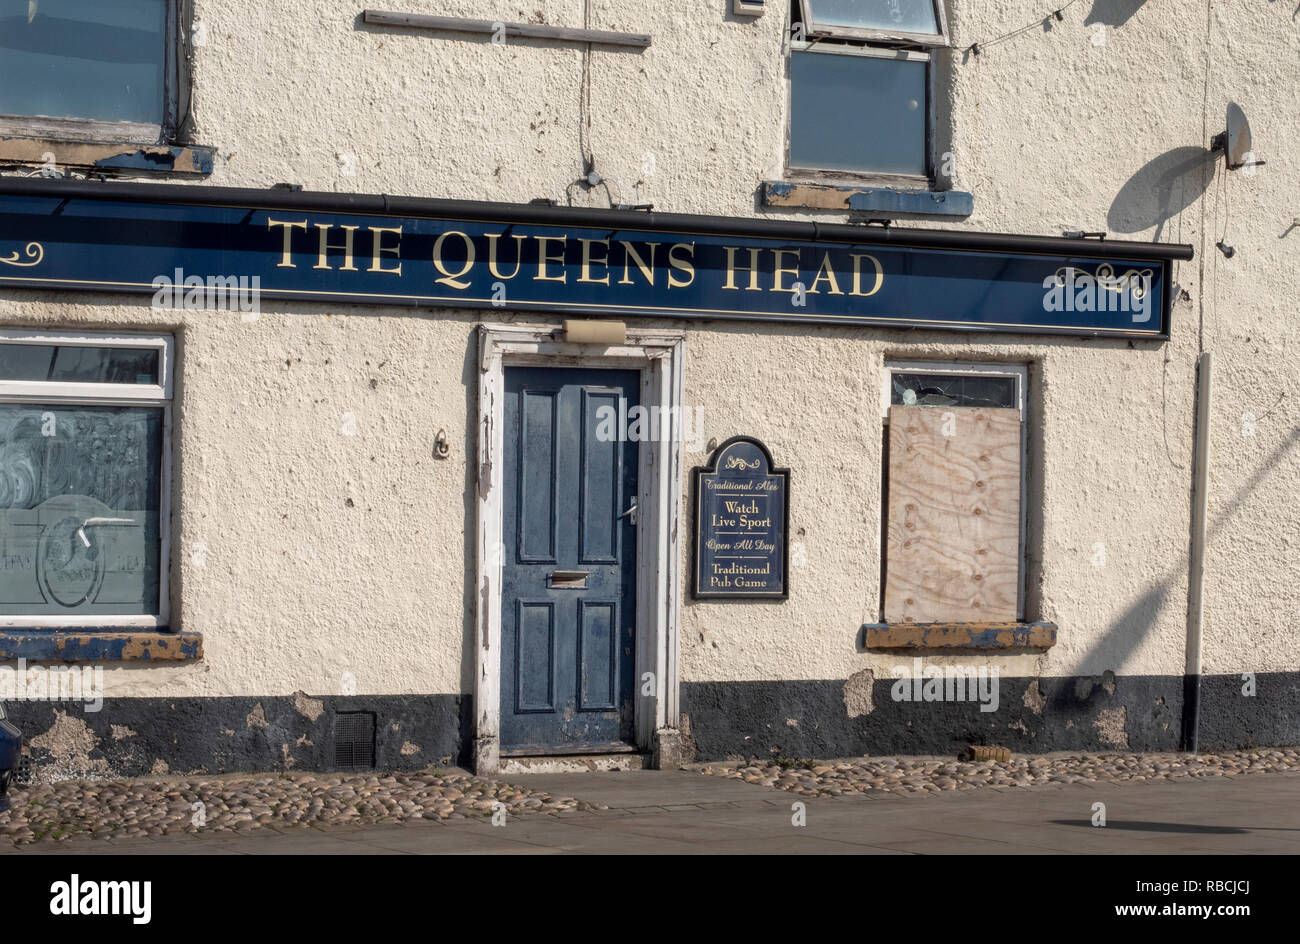 The closed and derelict public house - The Queens Head, West Auckland, Durham, England, UK. Stock Photo